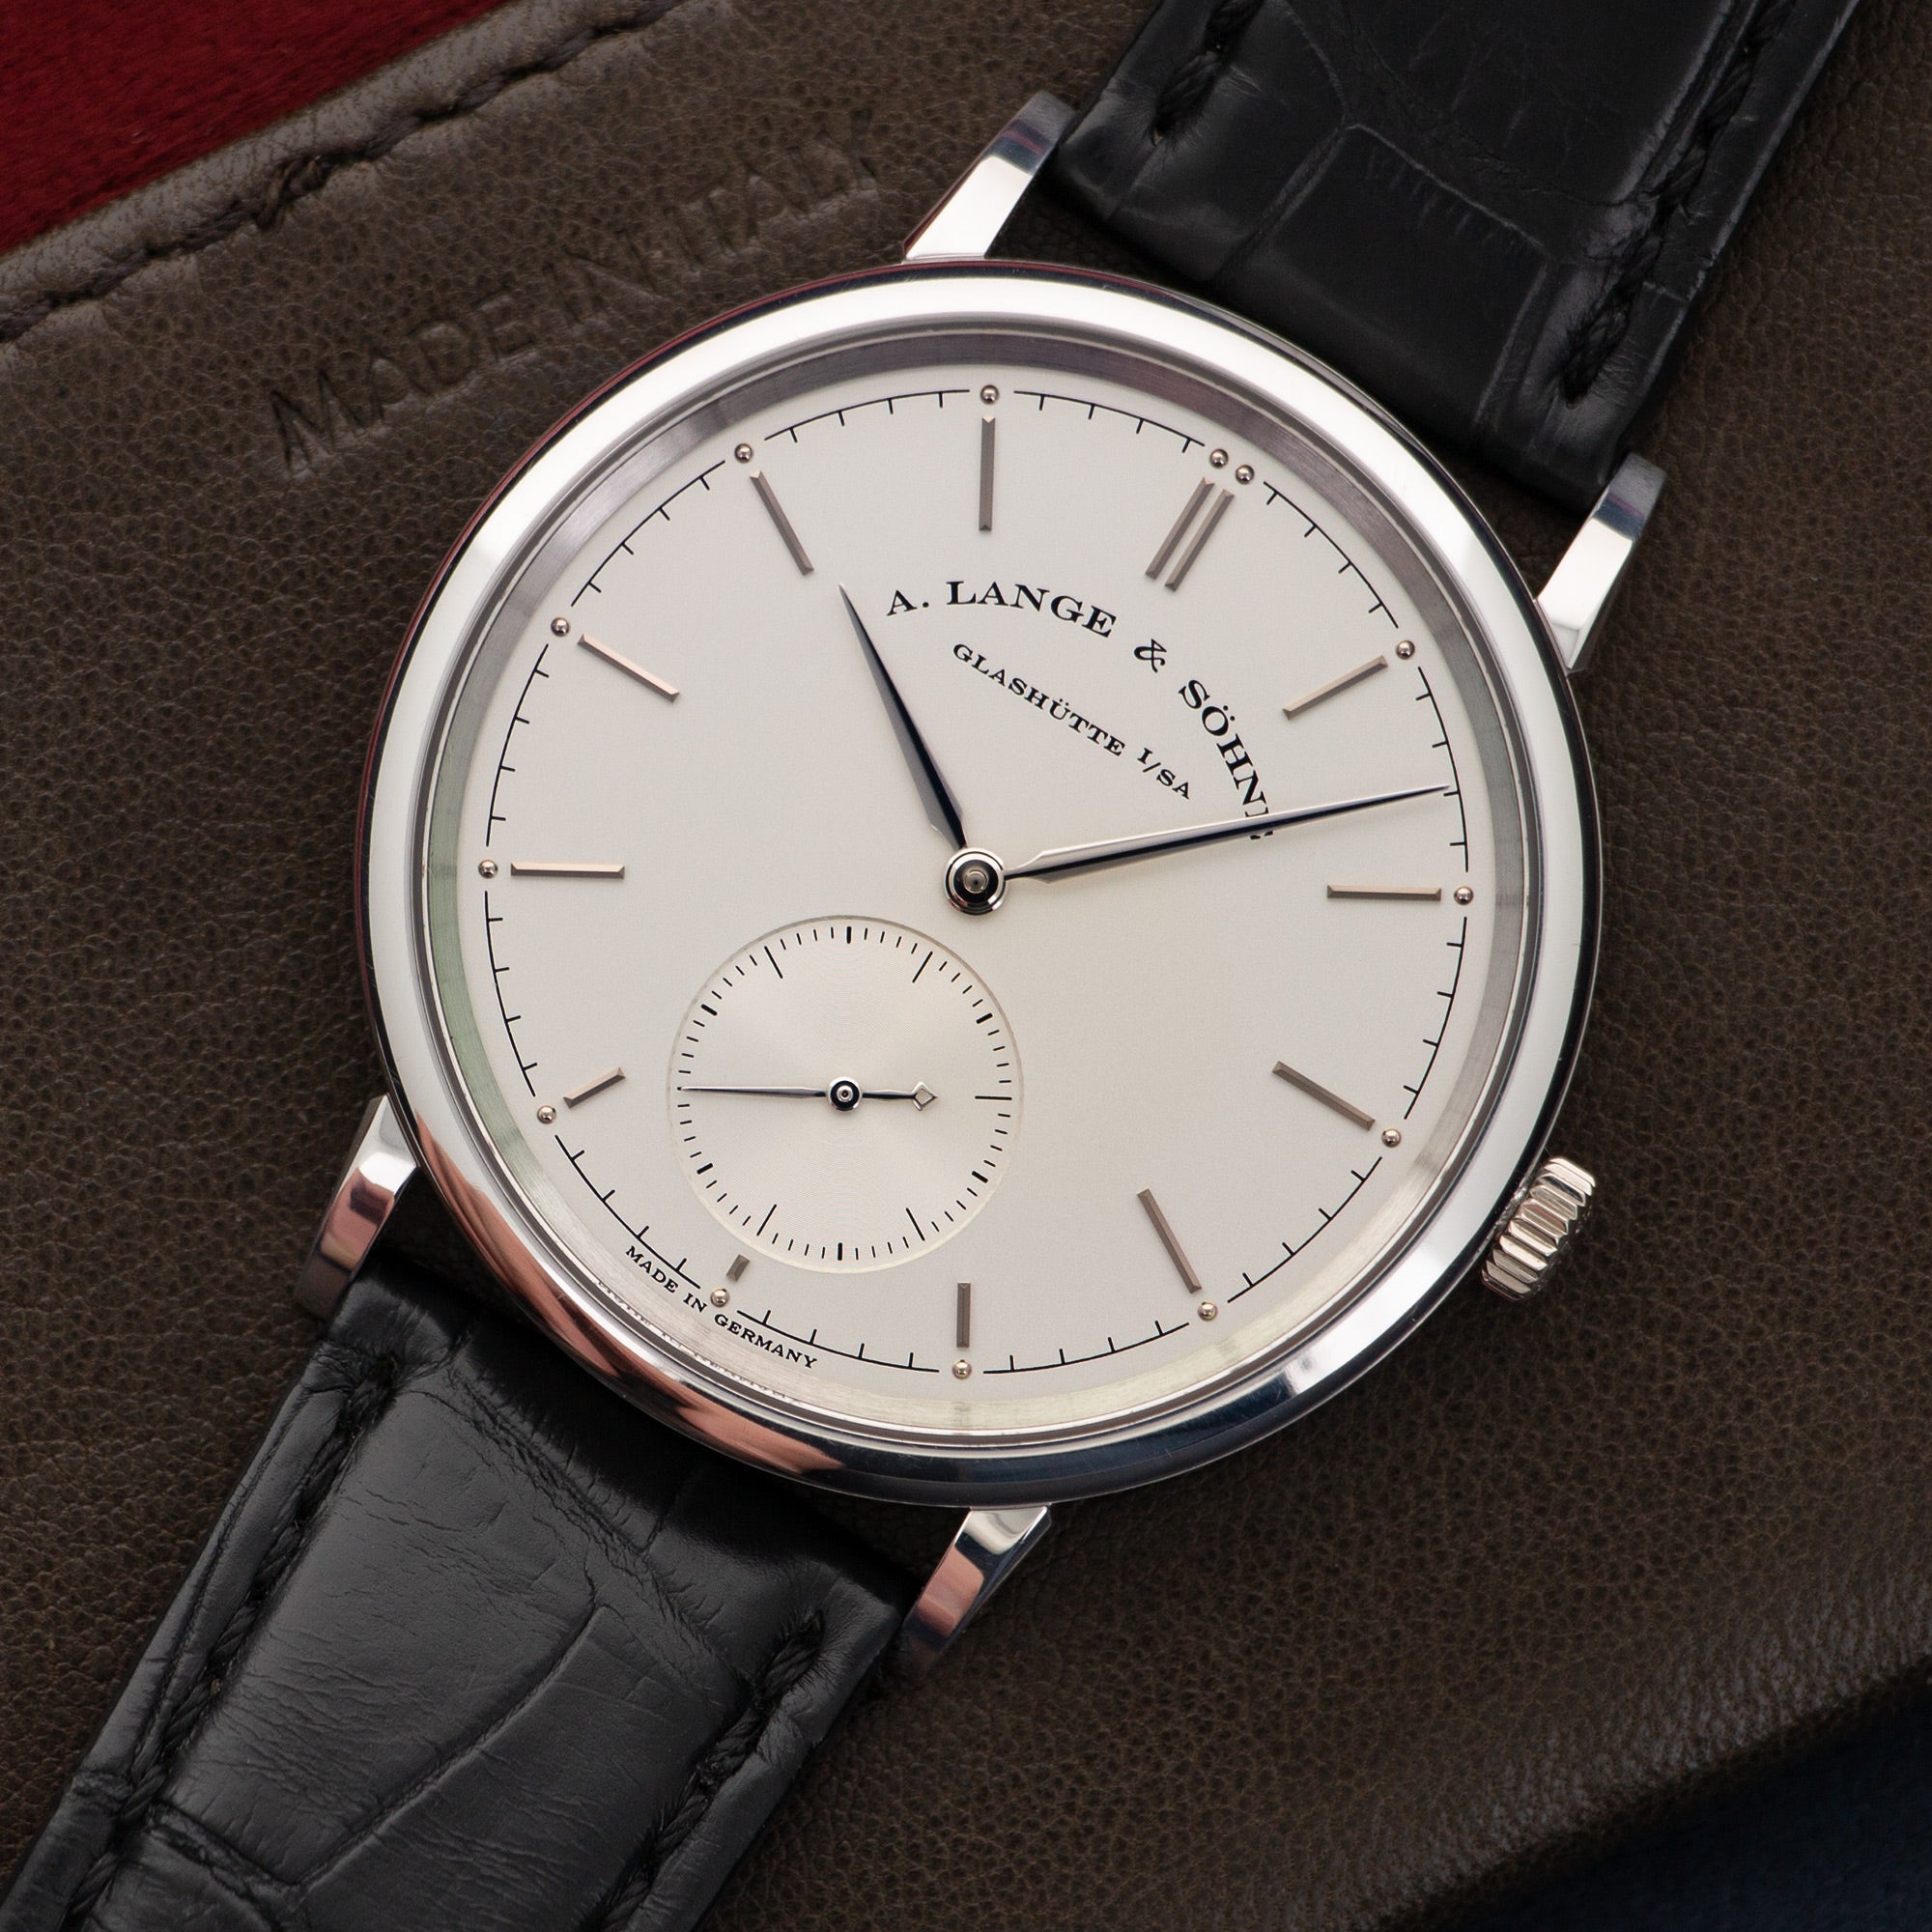 A. Lange &amp; Sohne - A. Lange &amp; Sohne White Gold Saxonia Automatic Watch Ref. 380.027 - The Keystone Watches